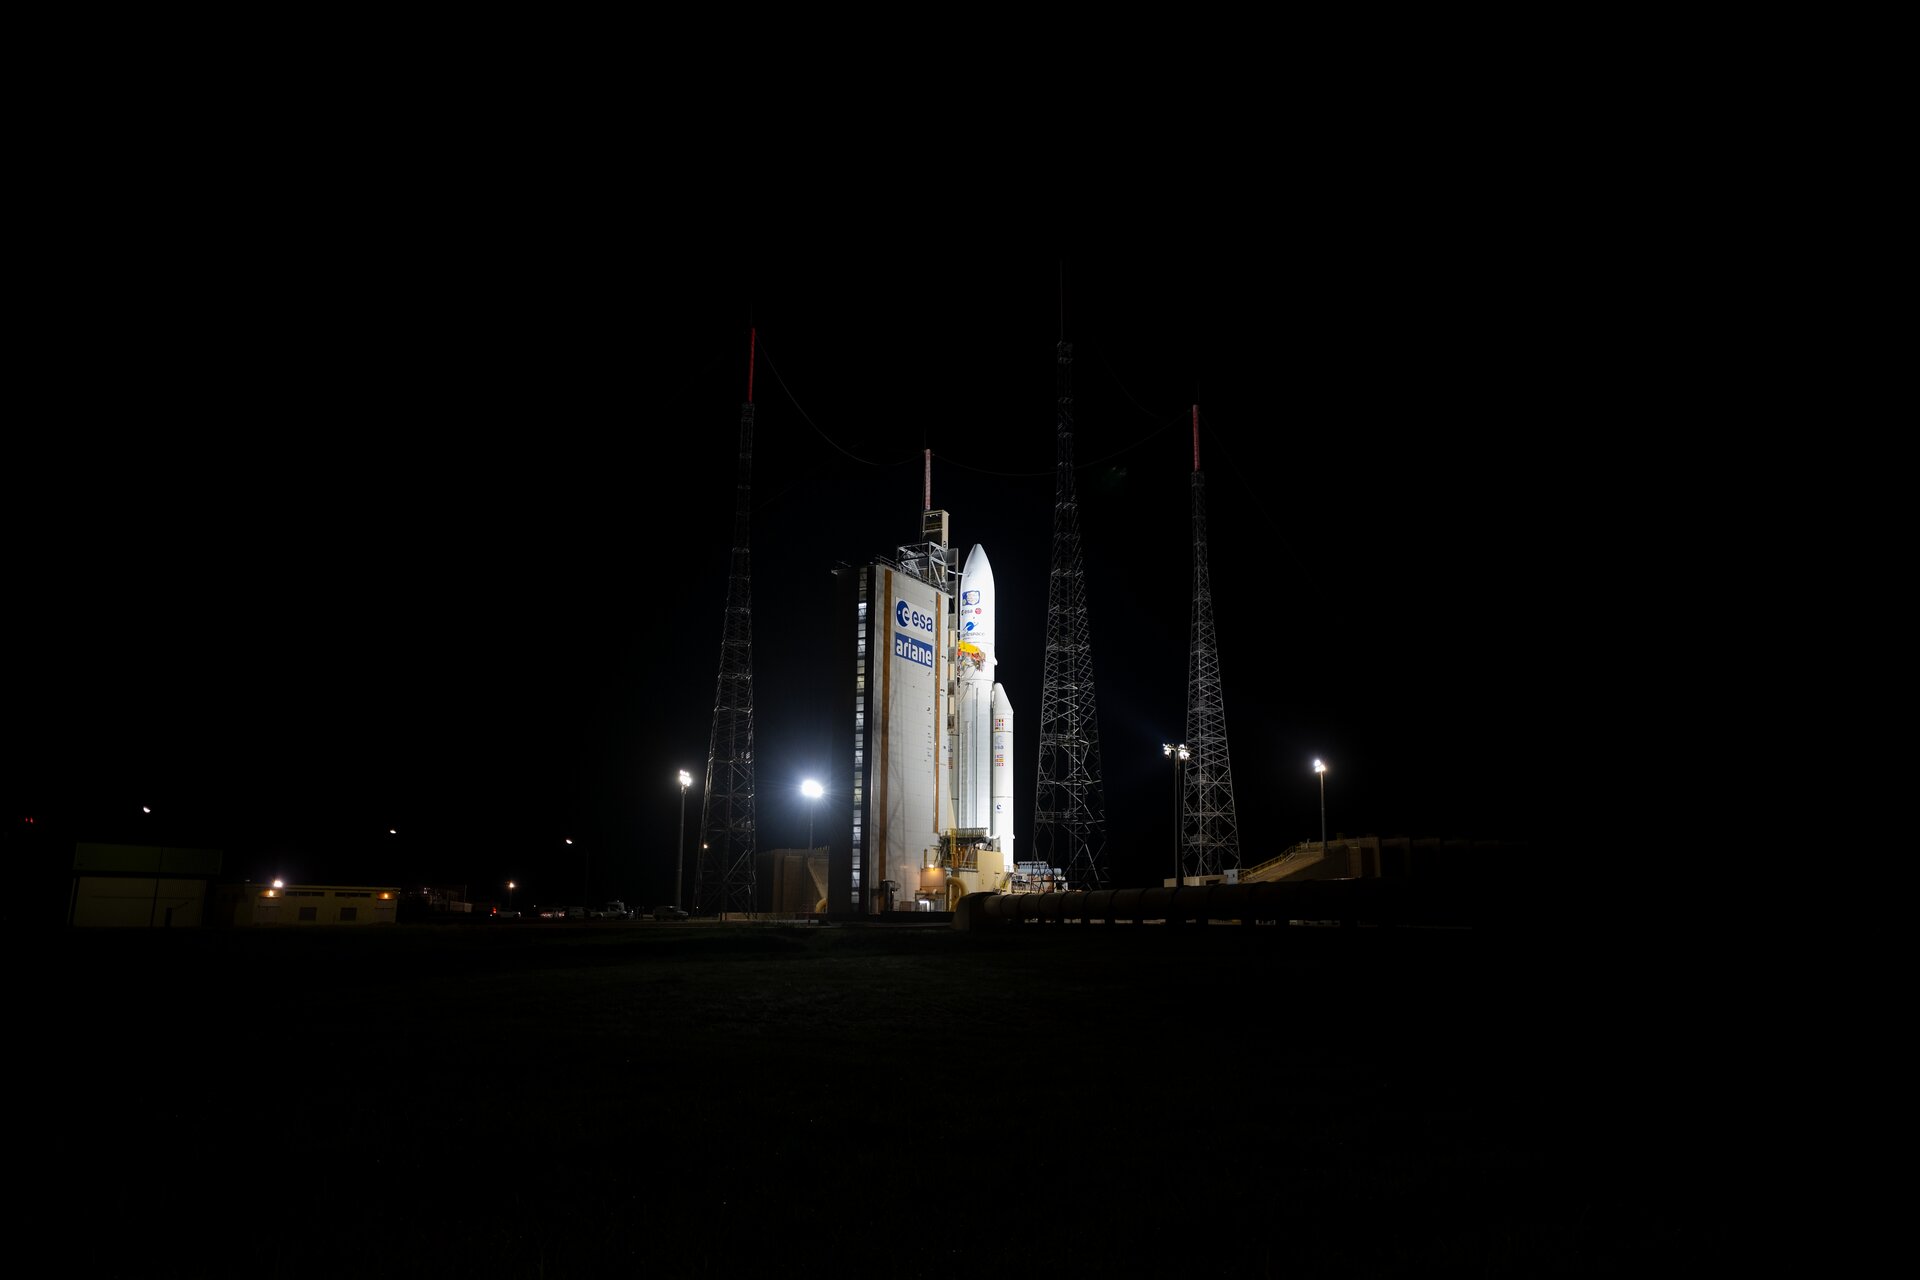 Ariane 5 VA 260 with Juice - Ready for launch